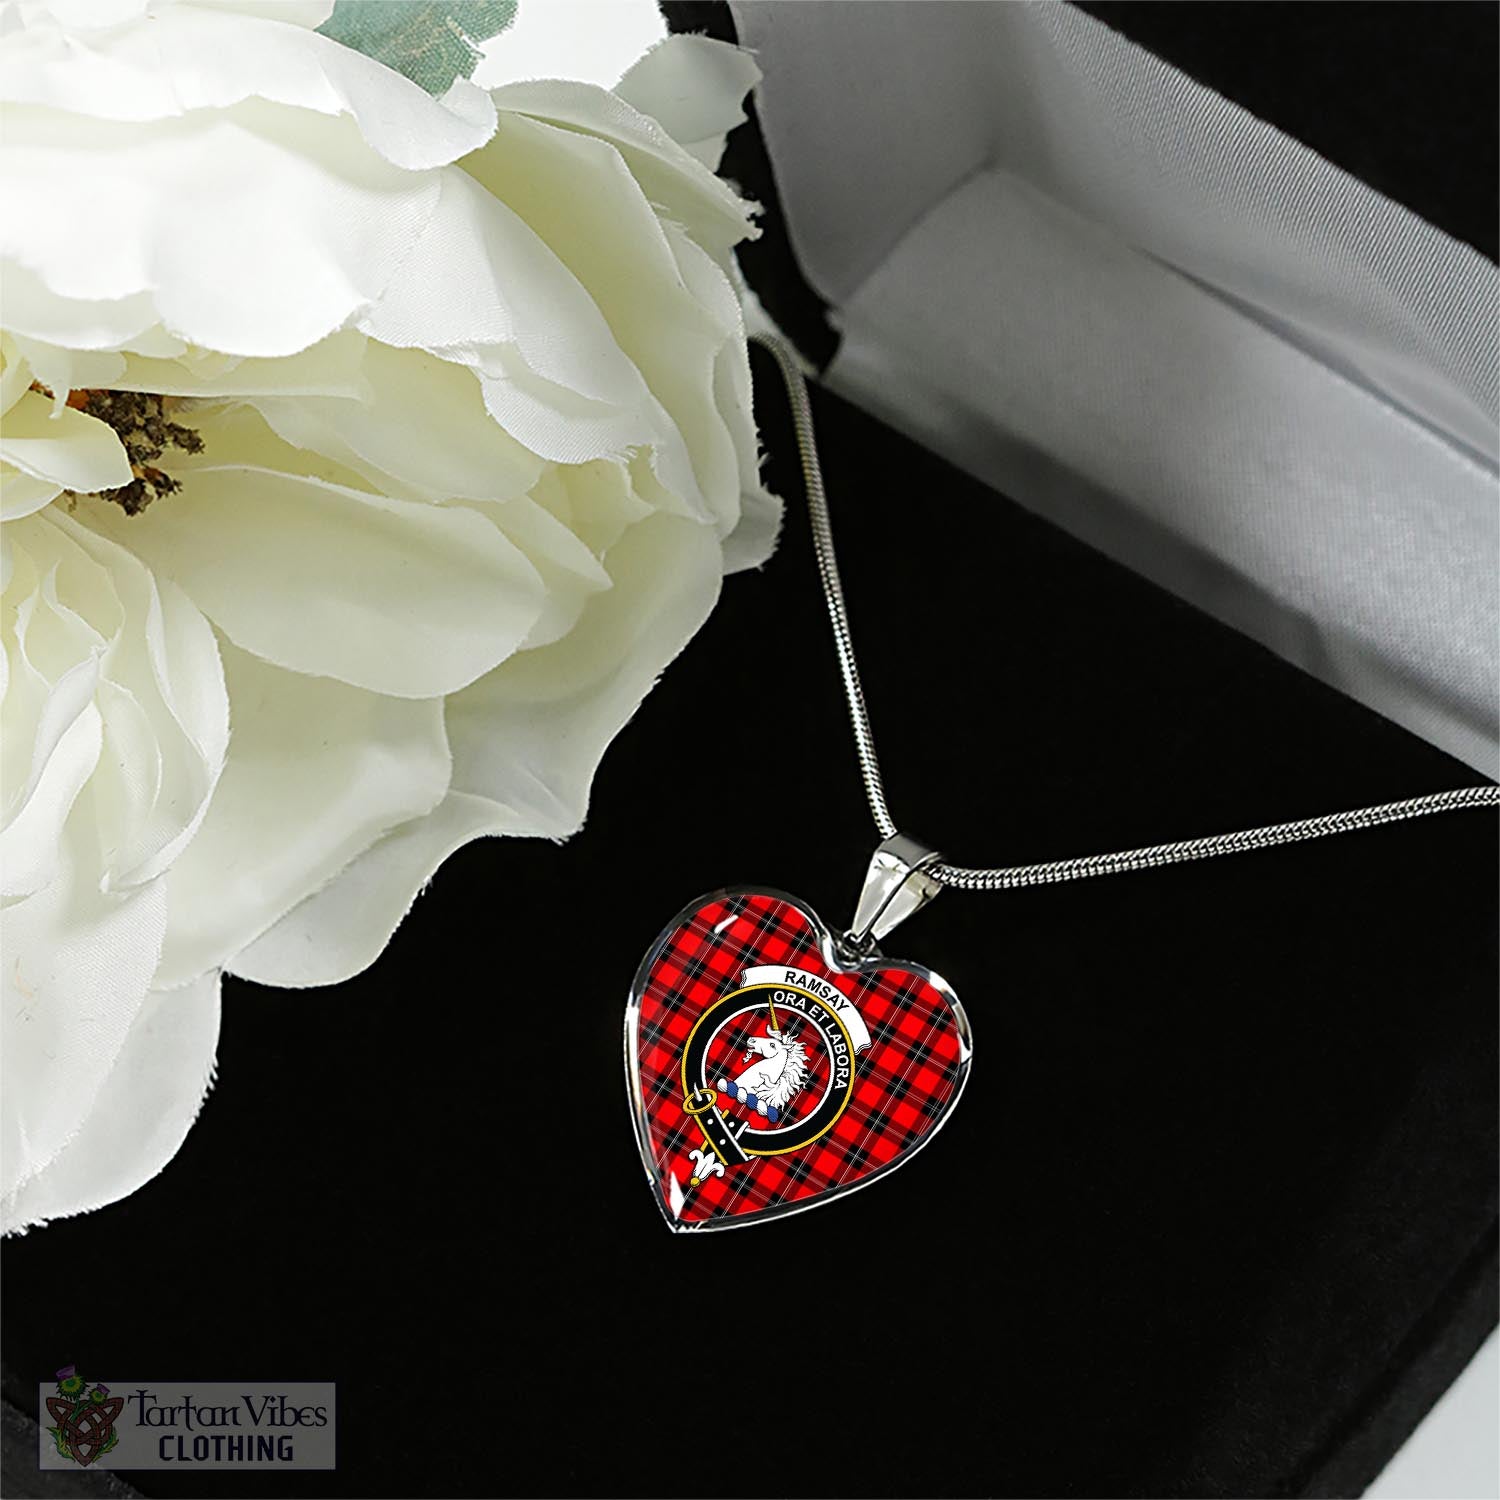 Tartan Vibes Clothing Ramsay Modern Tartan Heart Necklace with Family Crest